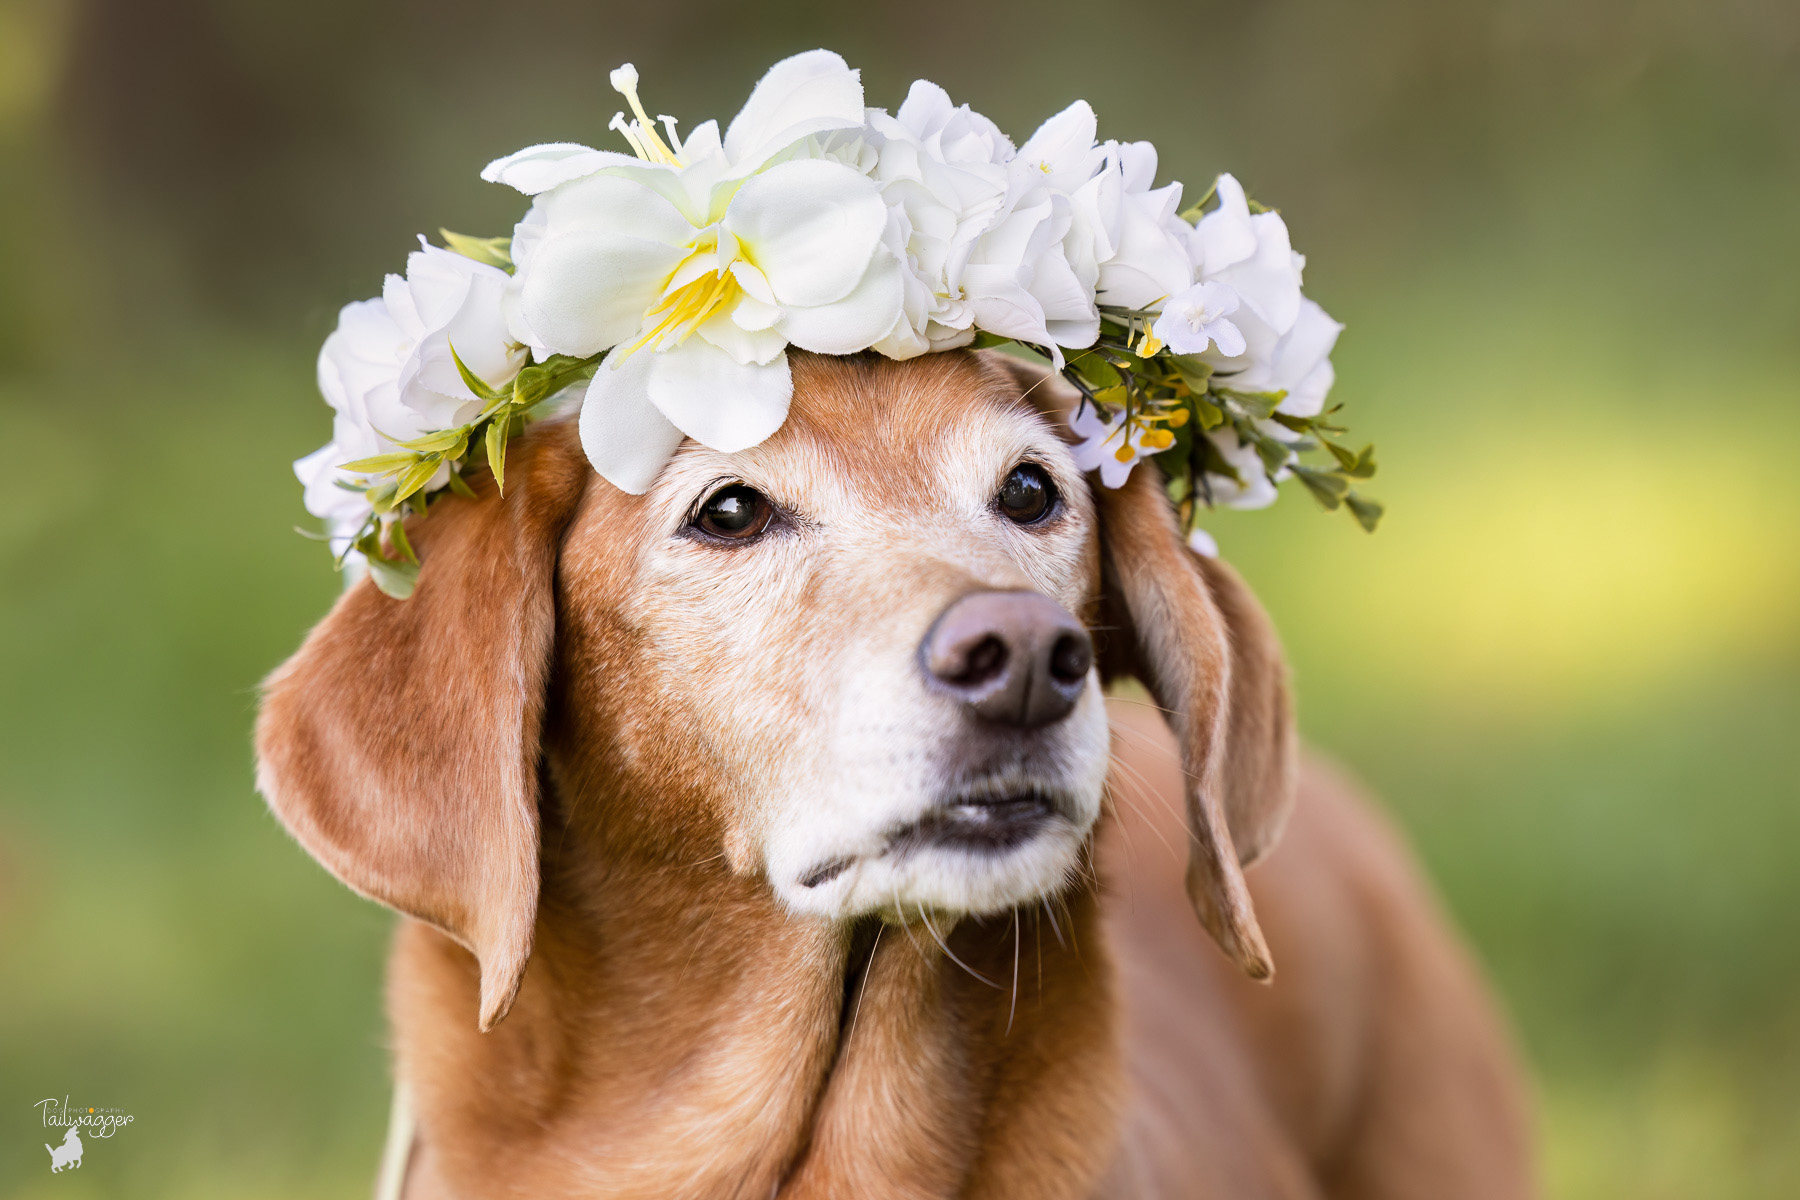 A headshot of a beagle mix with a white and yellow flower crown on her head in Johnson Park, Grand Rapids, MI.